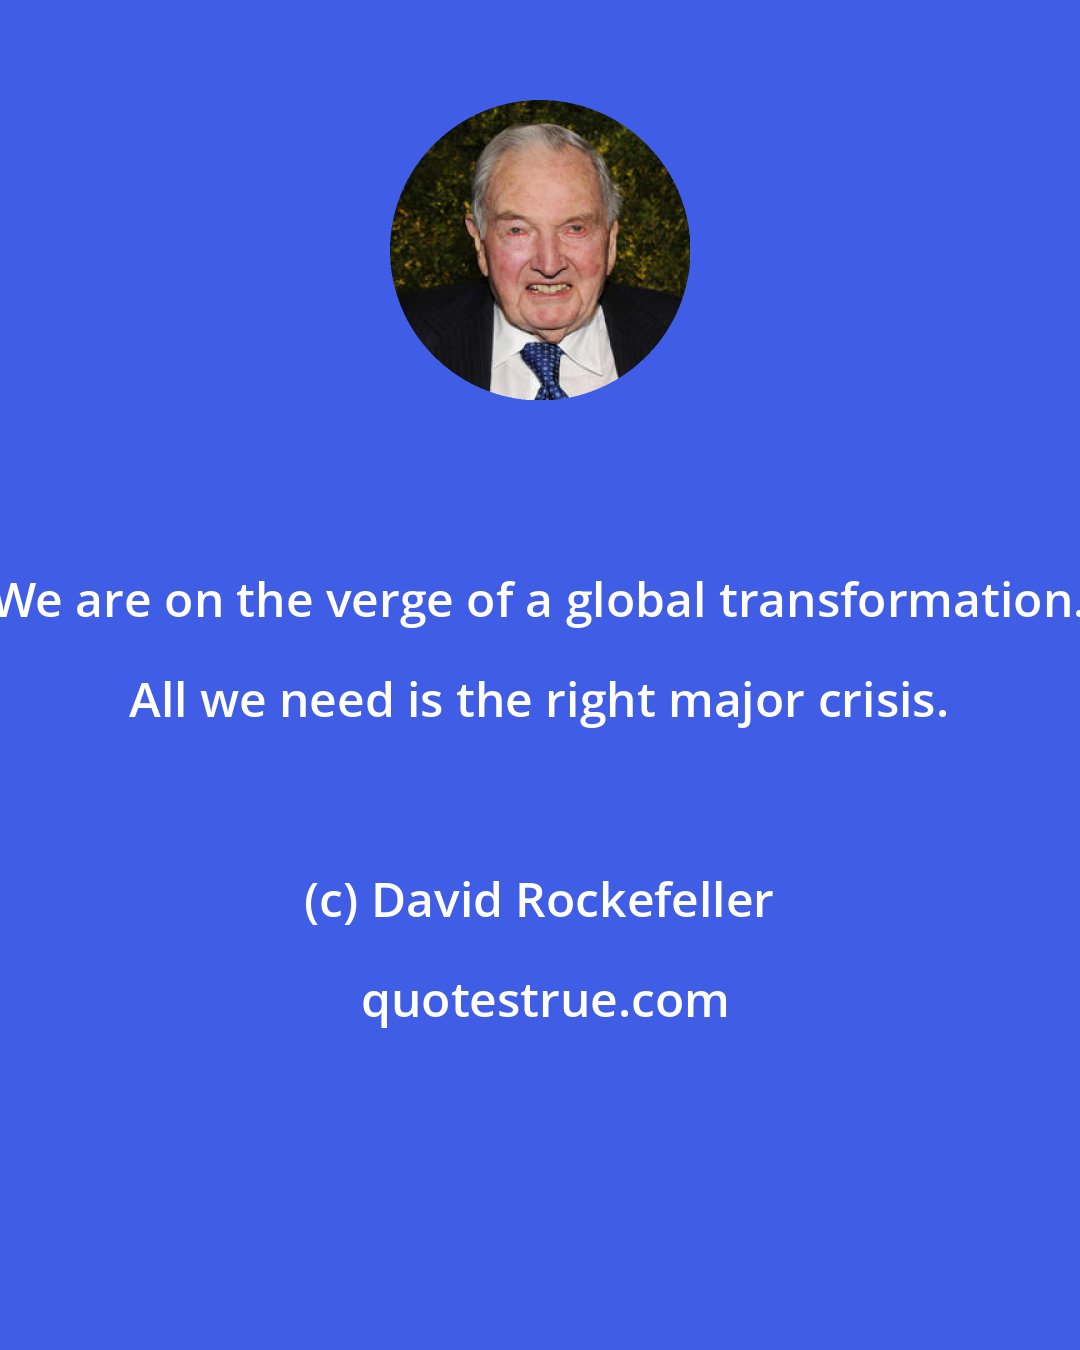 David Rockefeller: We are on the verge of a global transformation. All we need is the right major crisis.